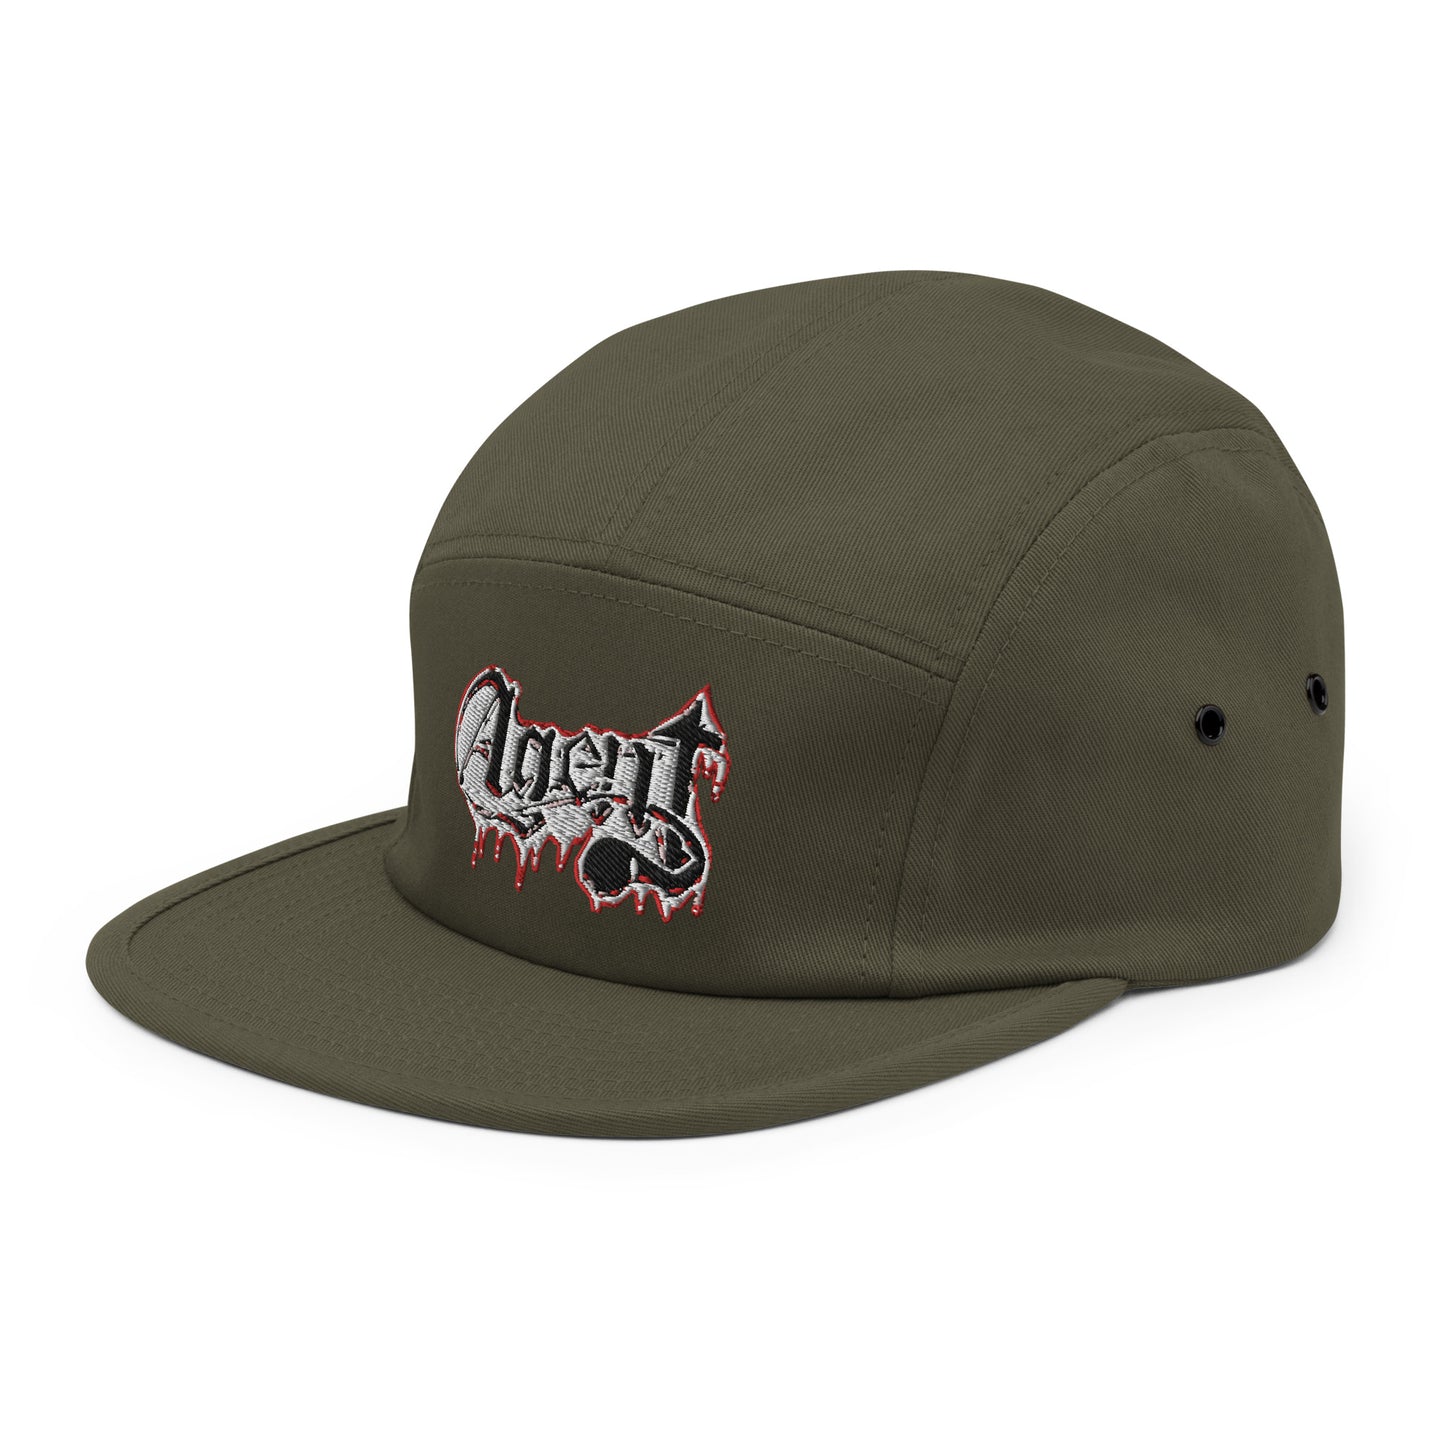 Agent Lungs Five Panel Hat